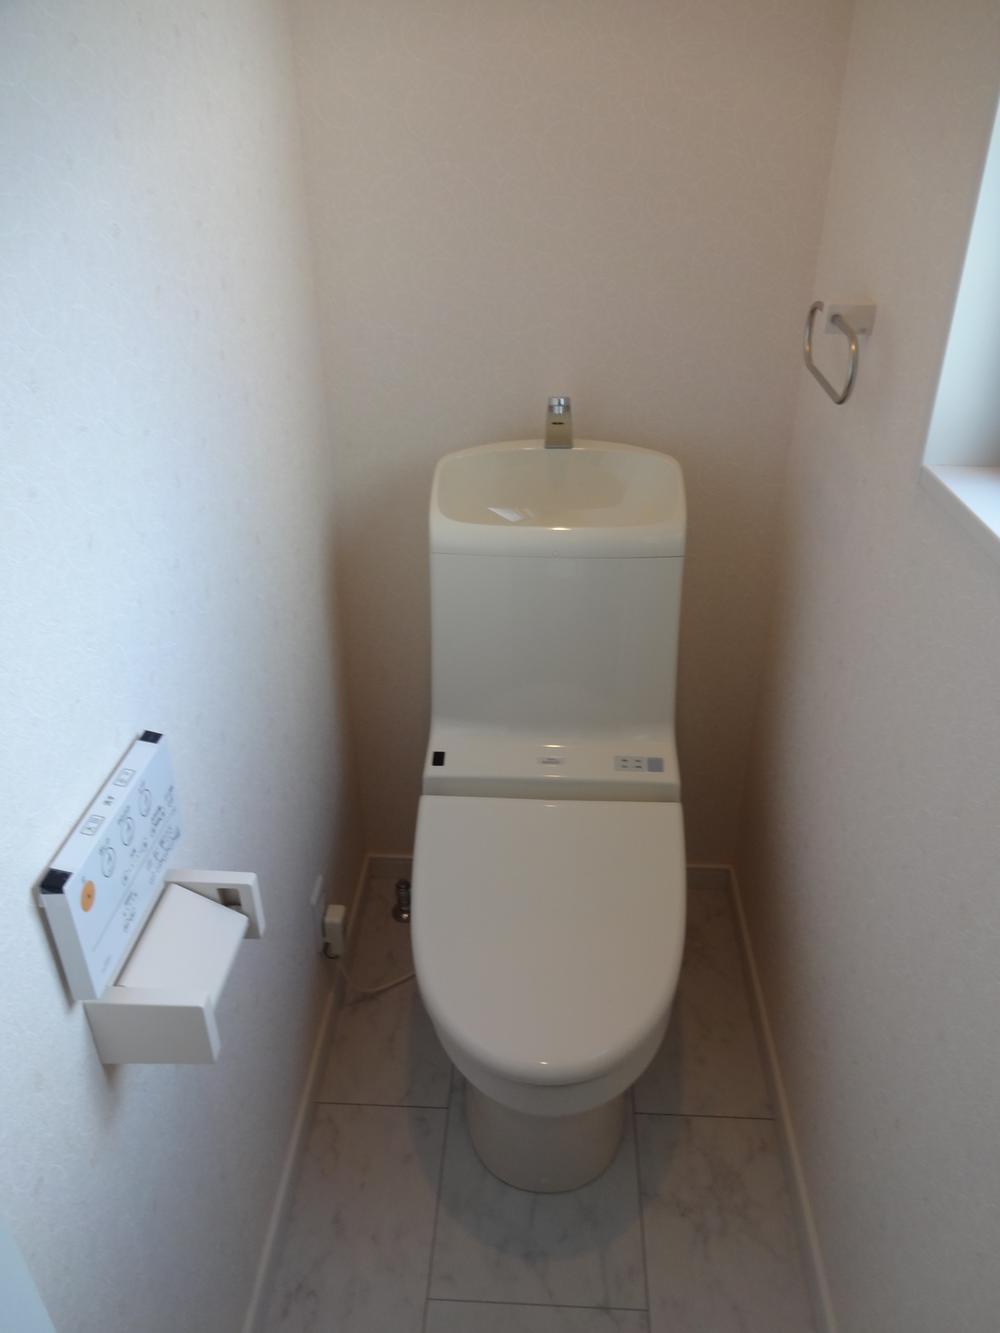 Toilet. Same specifications is a picture